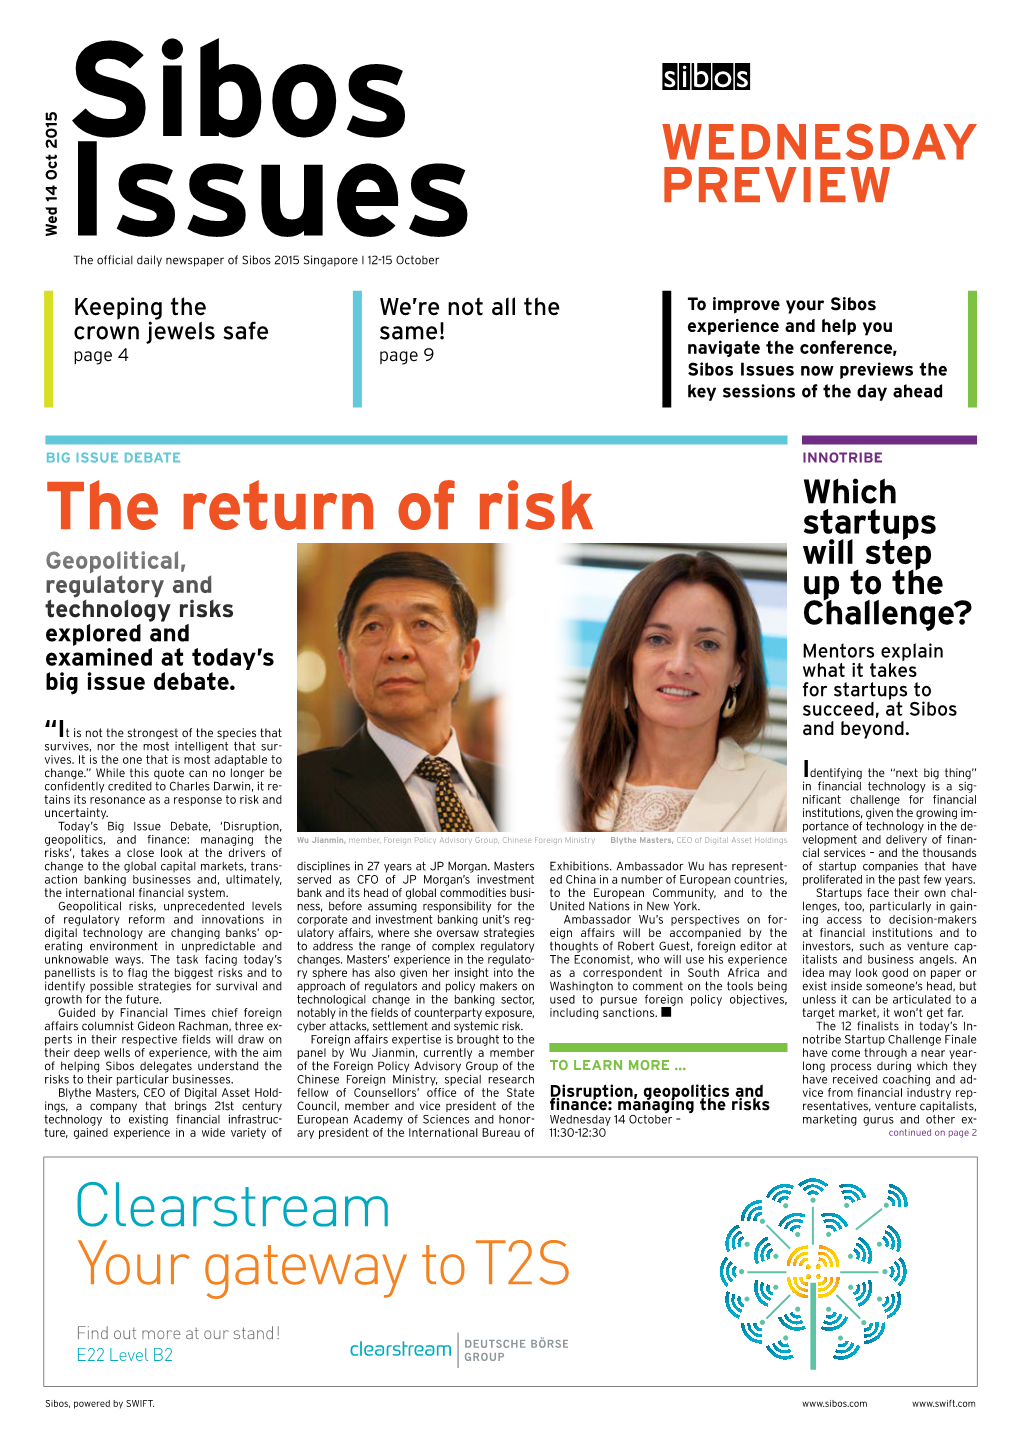 Sibos Issues Now Previews the Key Sessions of the Day Ahead